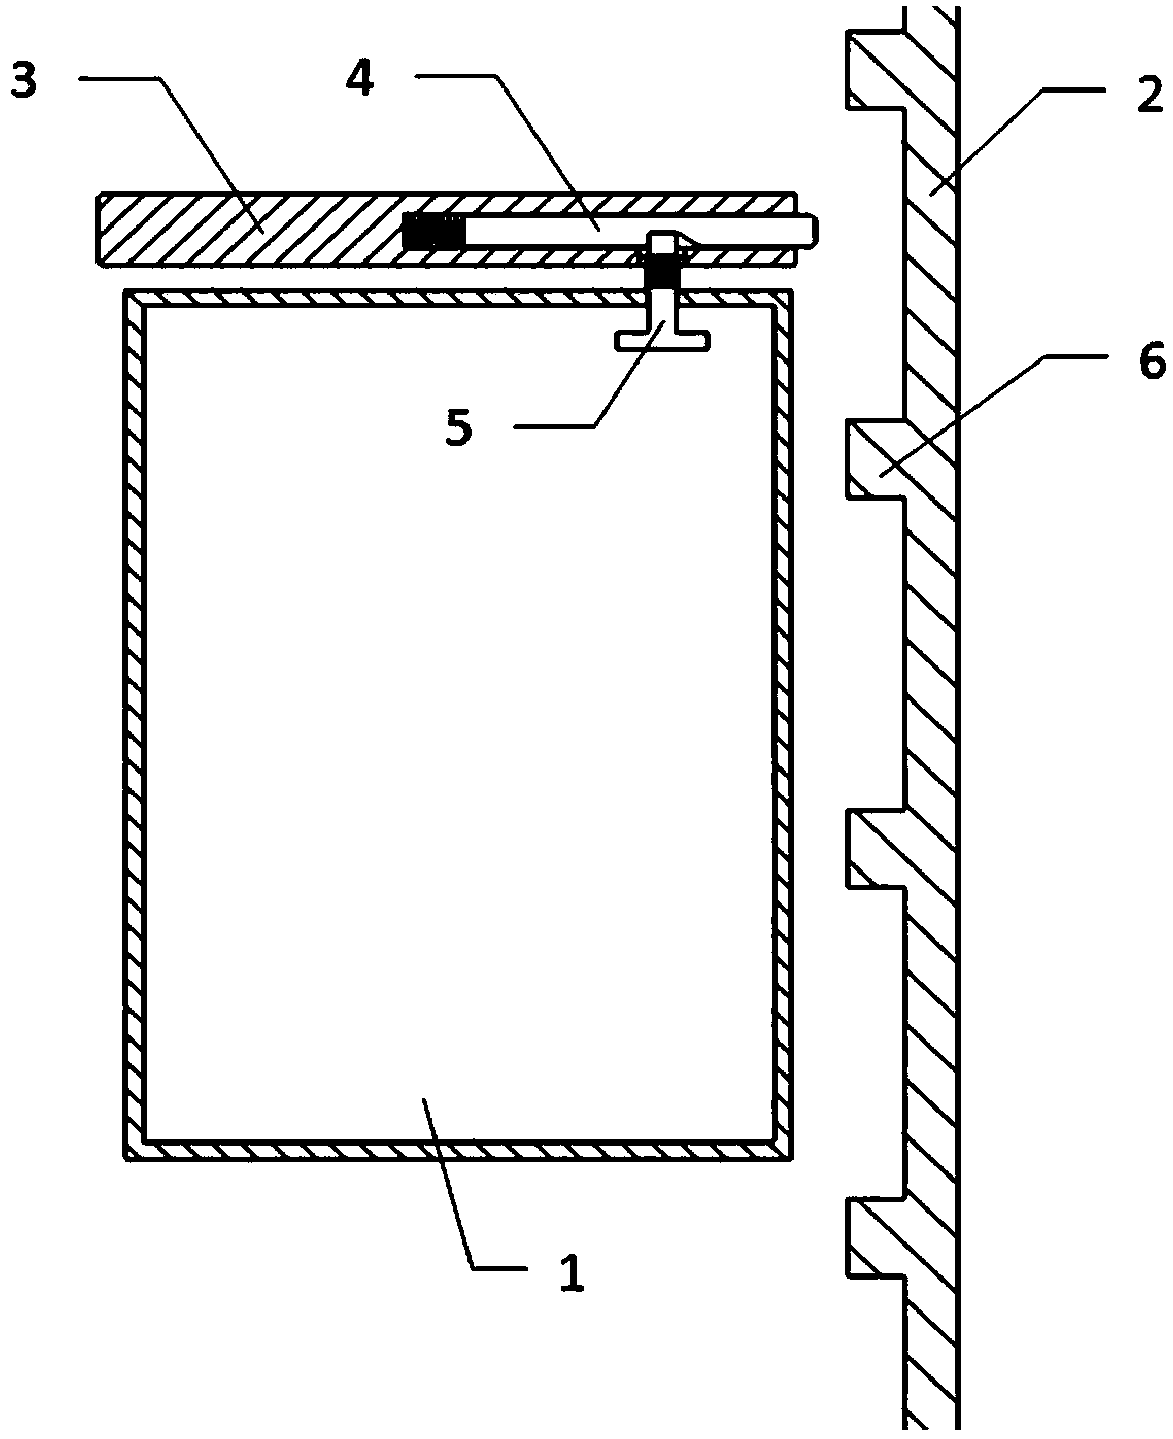 A vertical elevator with composite locking pins